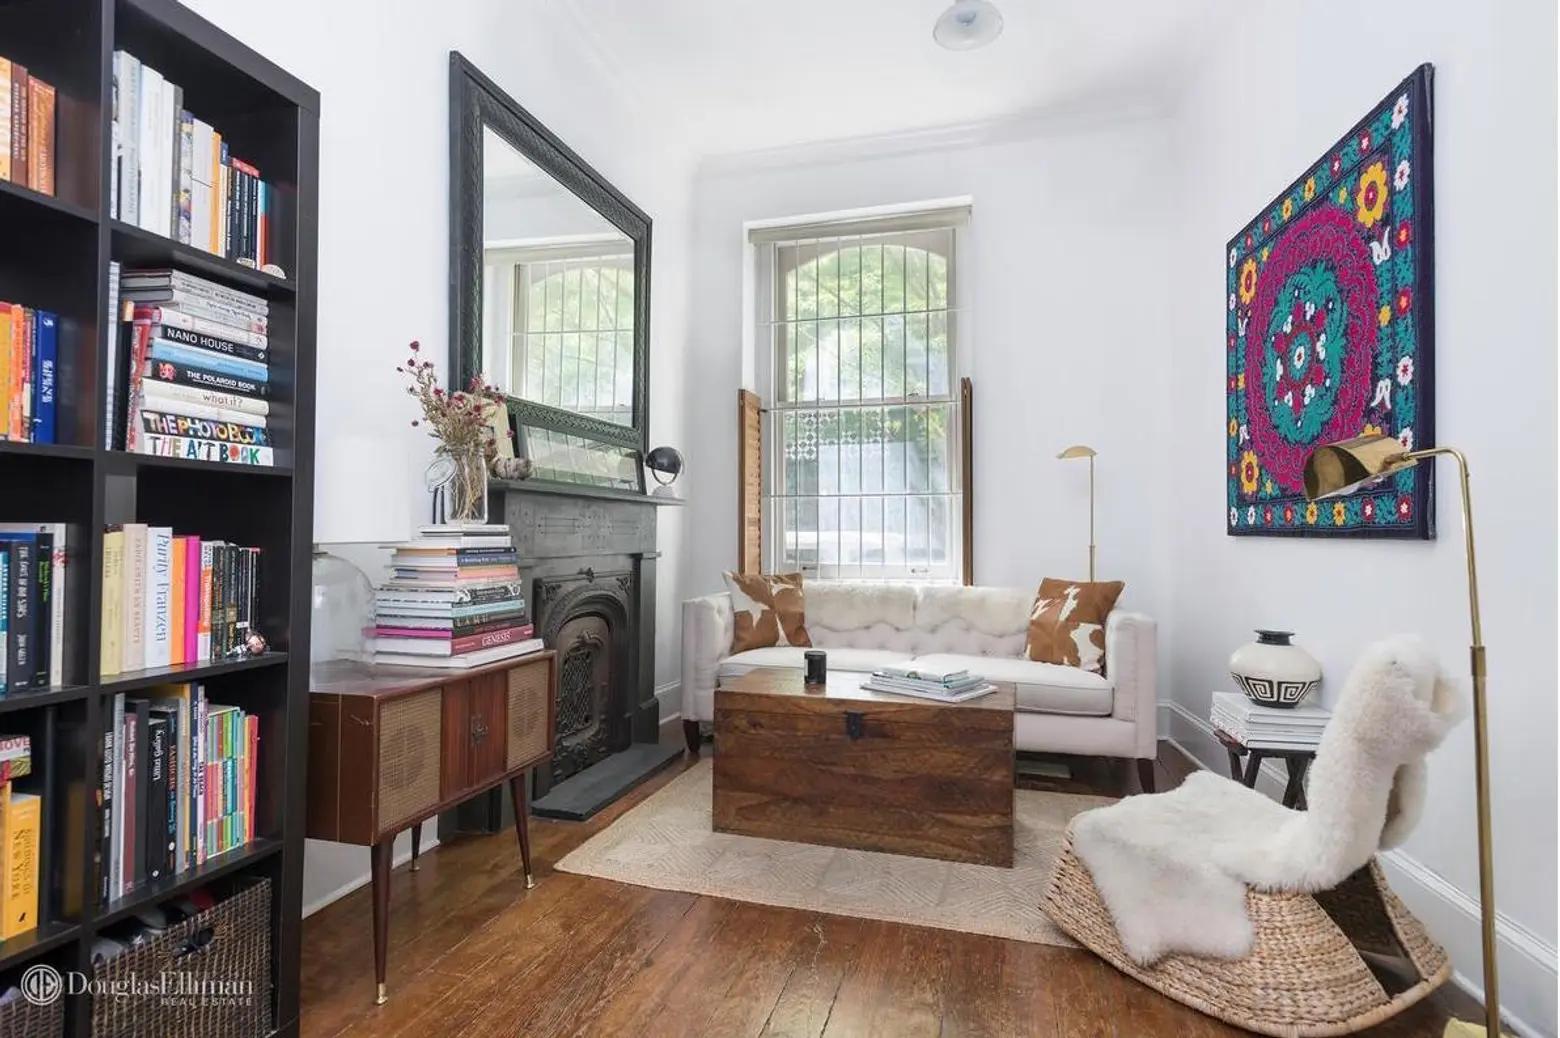 $3,500/month West Village rental is flexible, functional, and fun